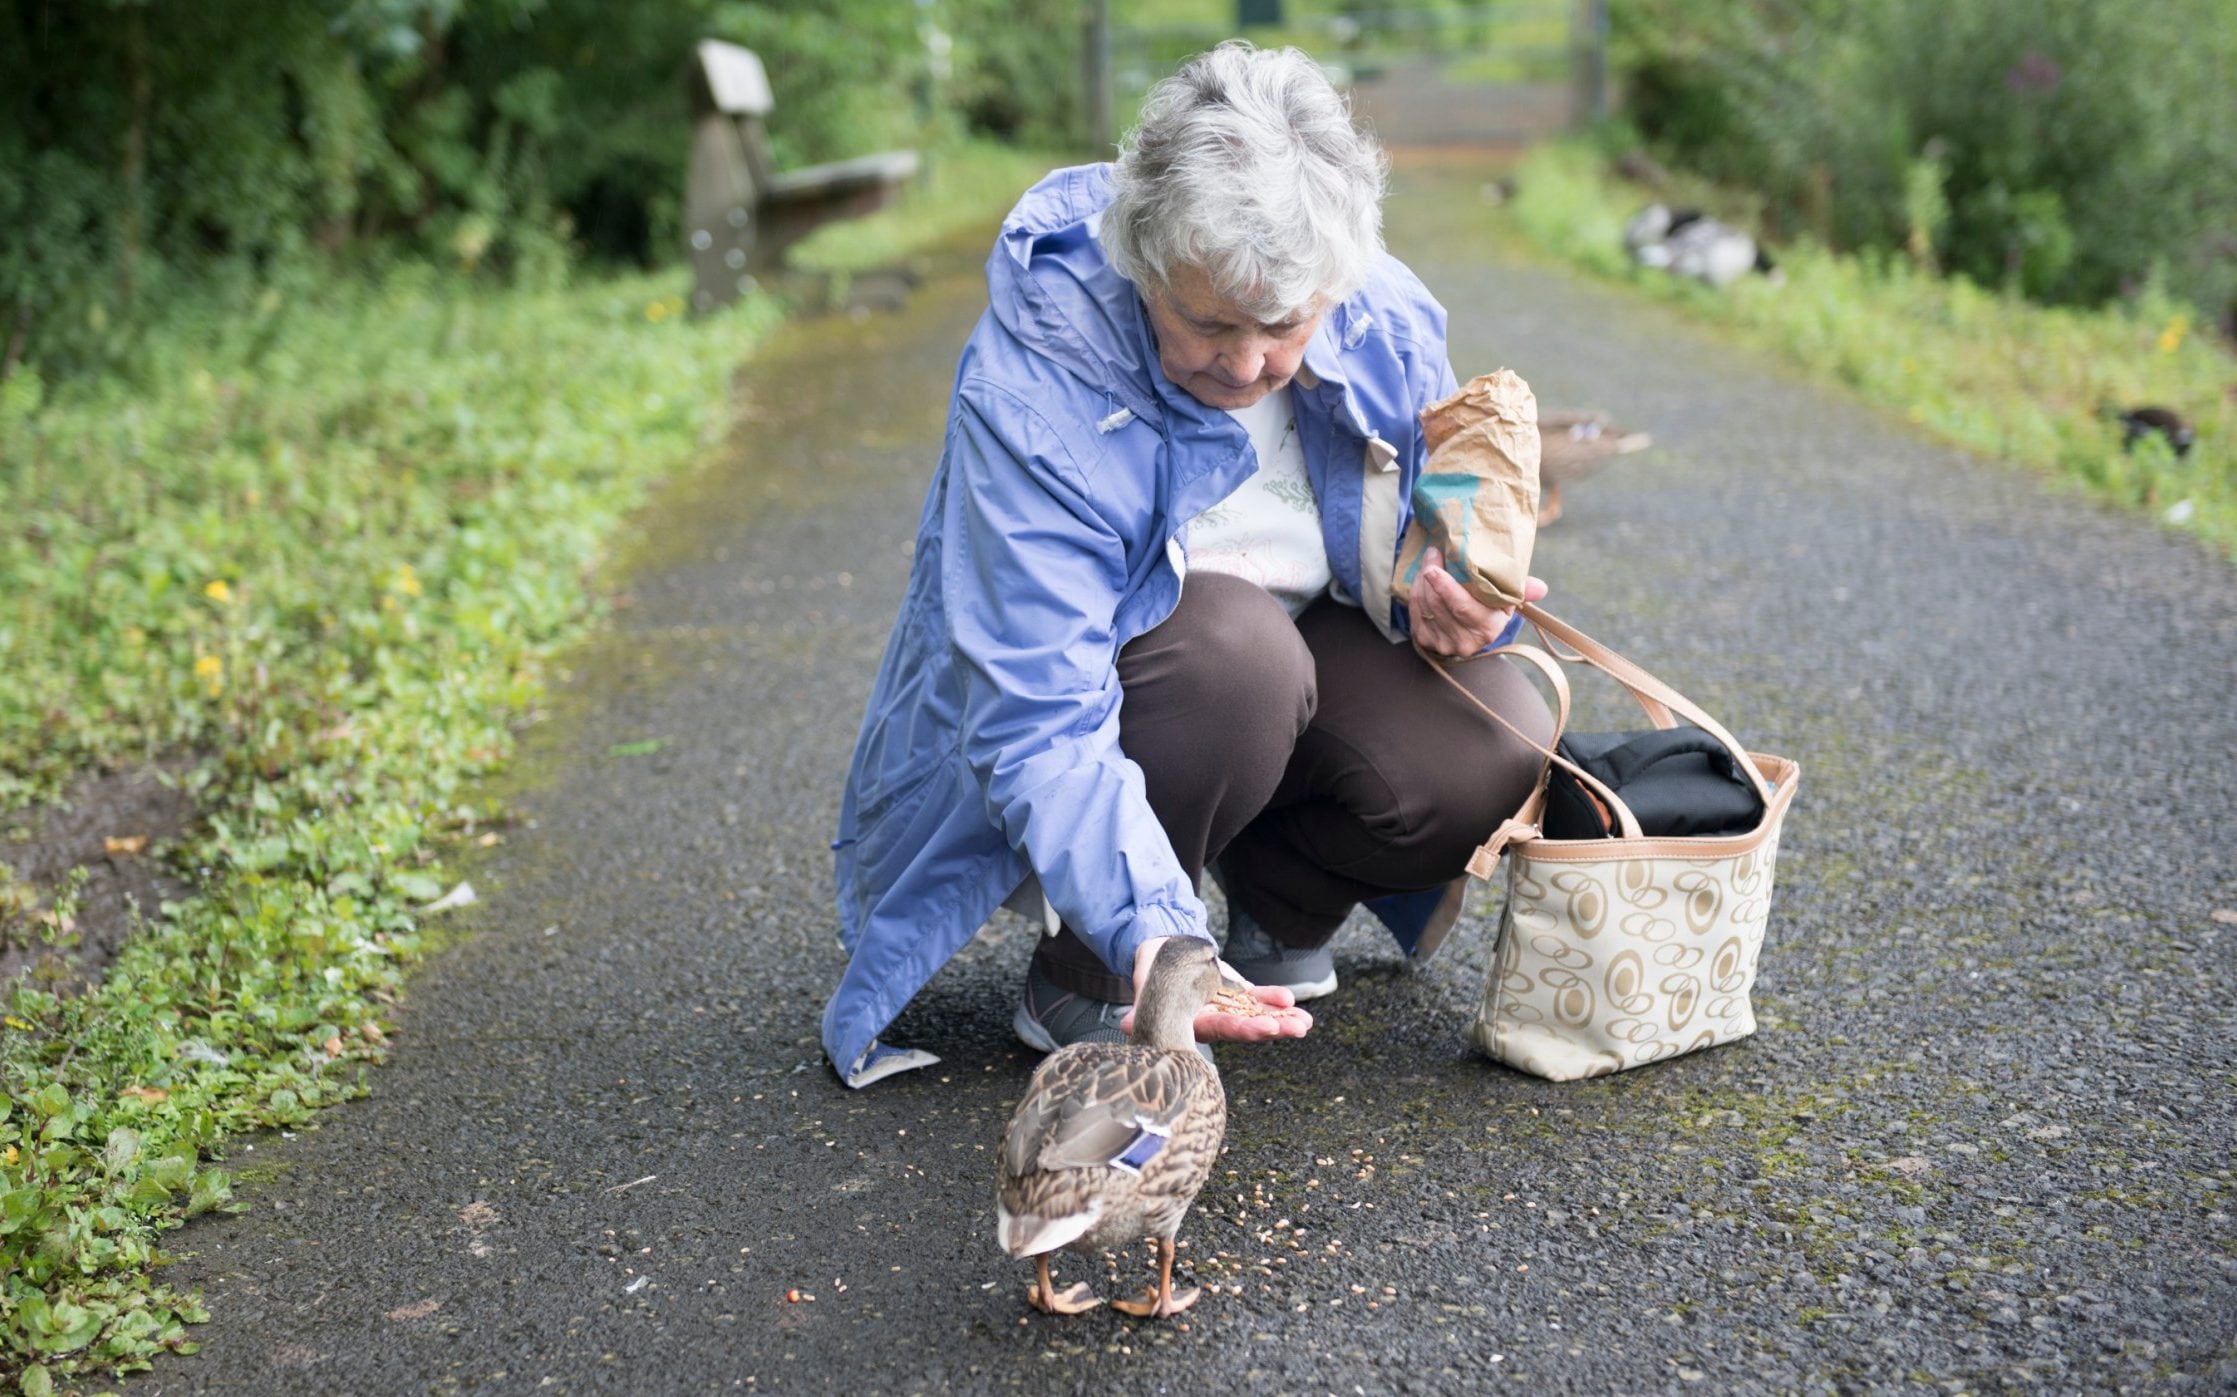 Feeding the ducks in park could mean £100 fine